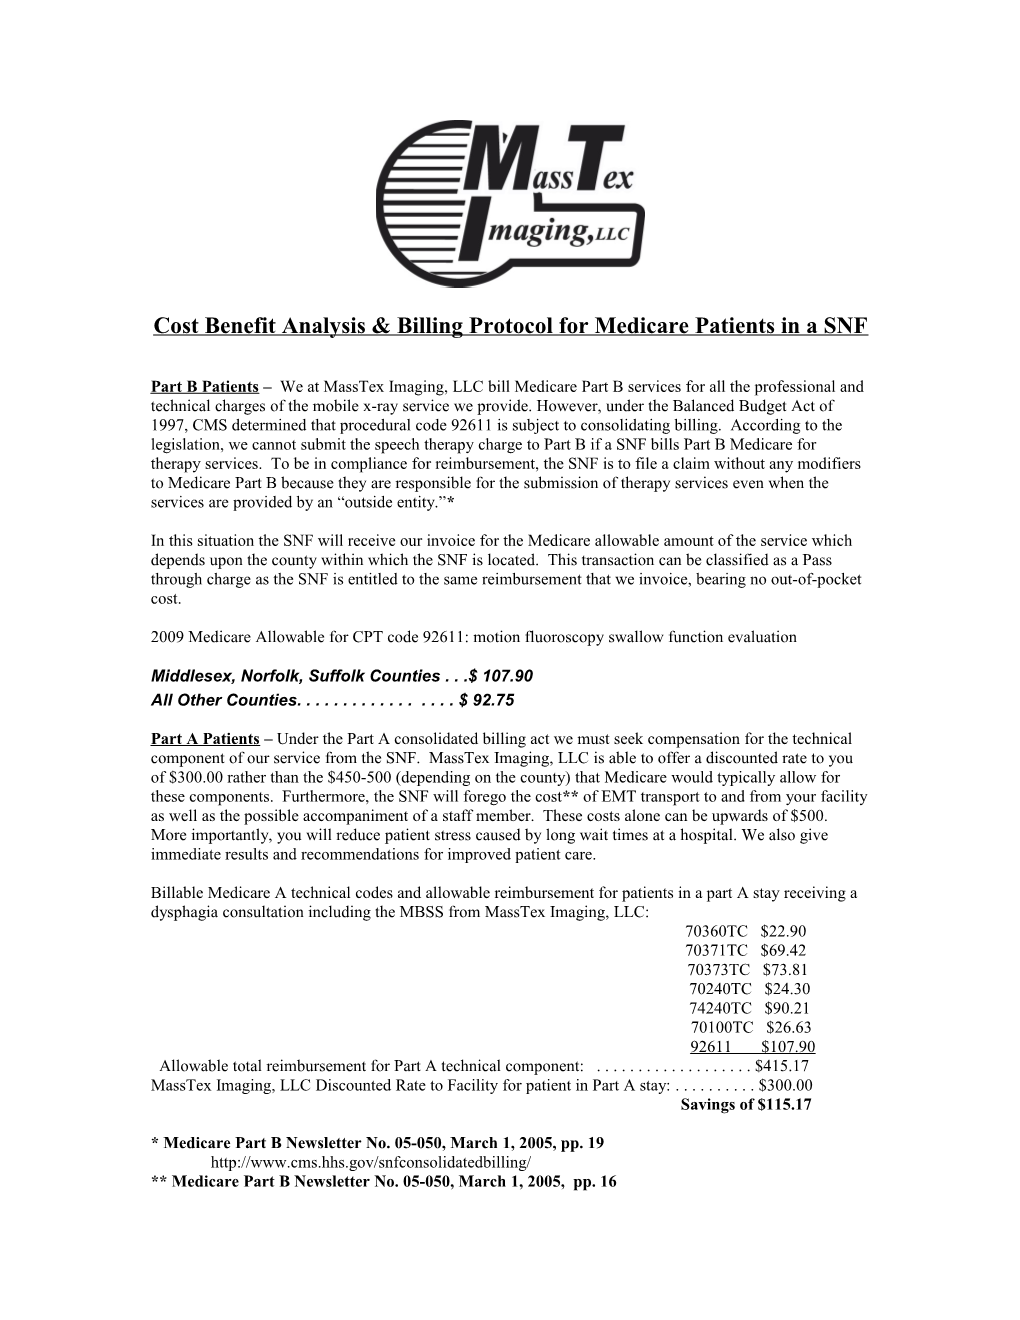 Cost Benefit Analysis & Billing Protocol for Medicare Patients in a SNF